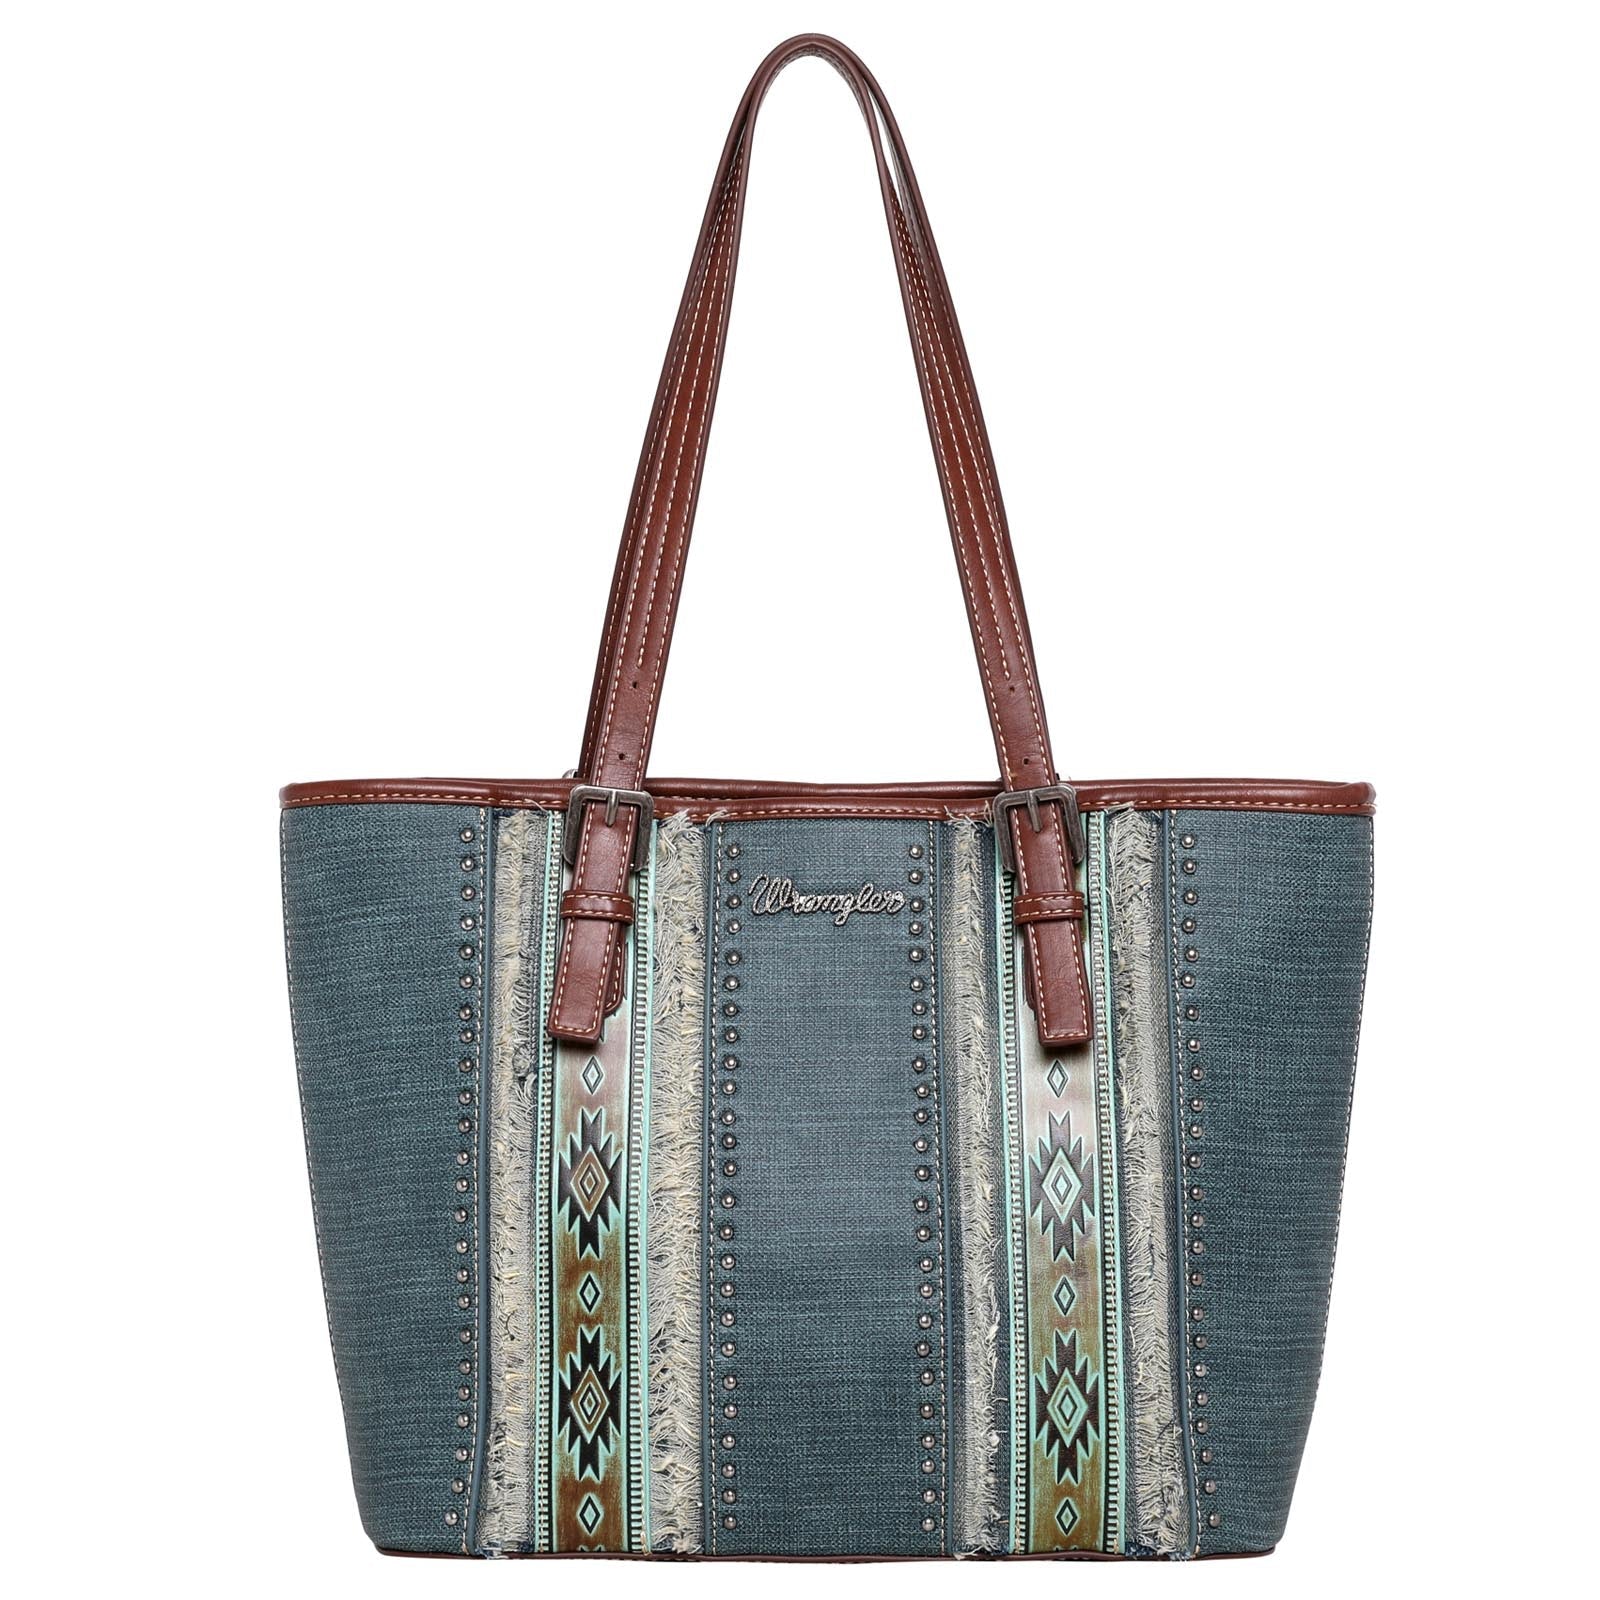 Wrangler Aztec Concealed Carry Tote - Cowgirl Wear